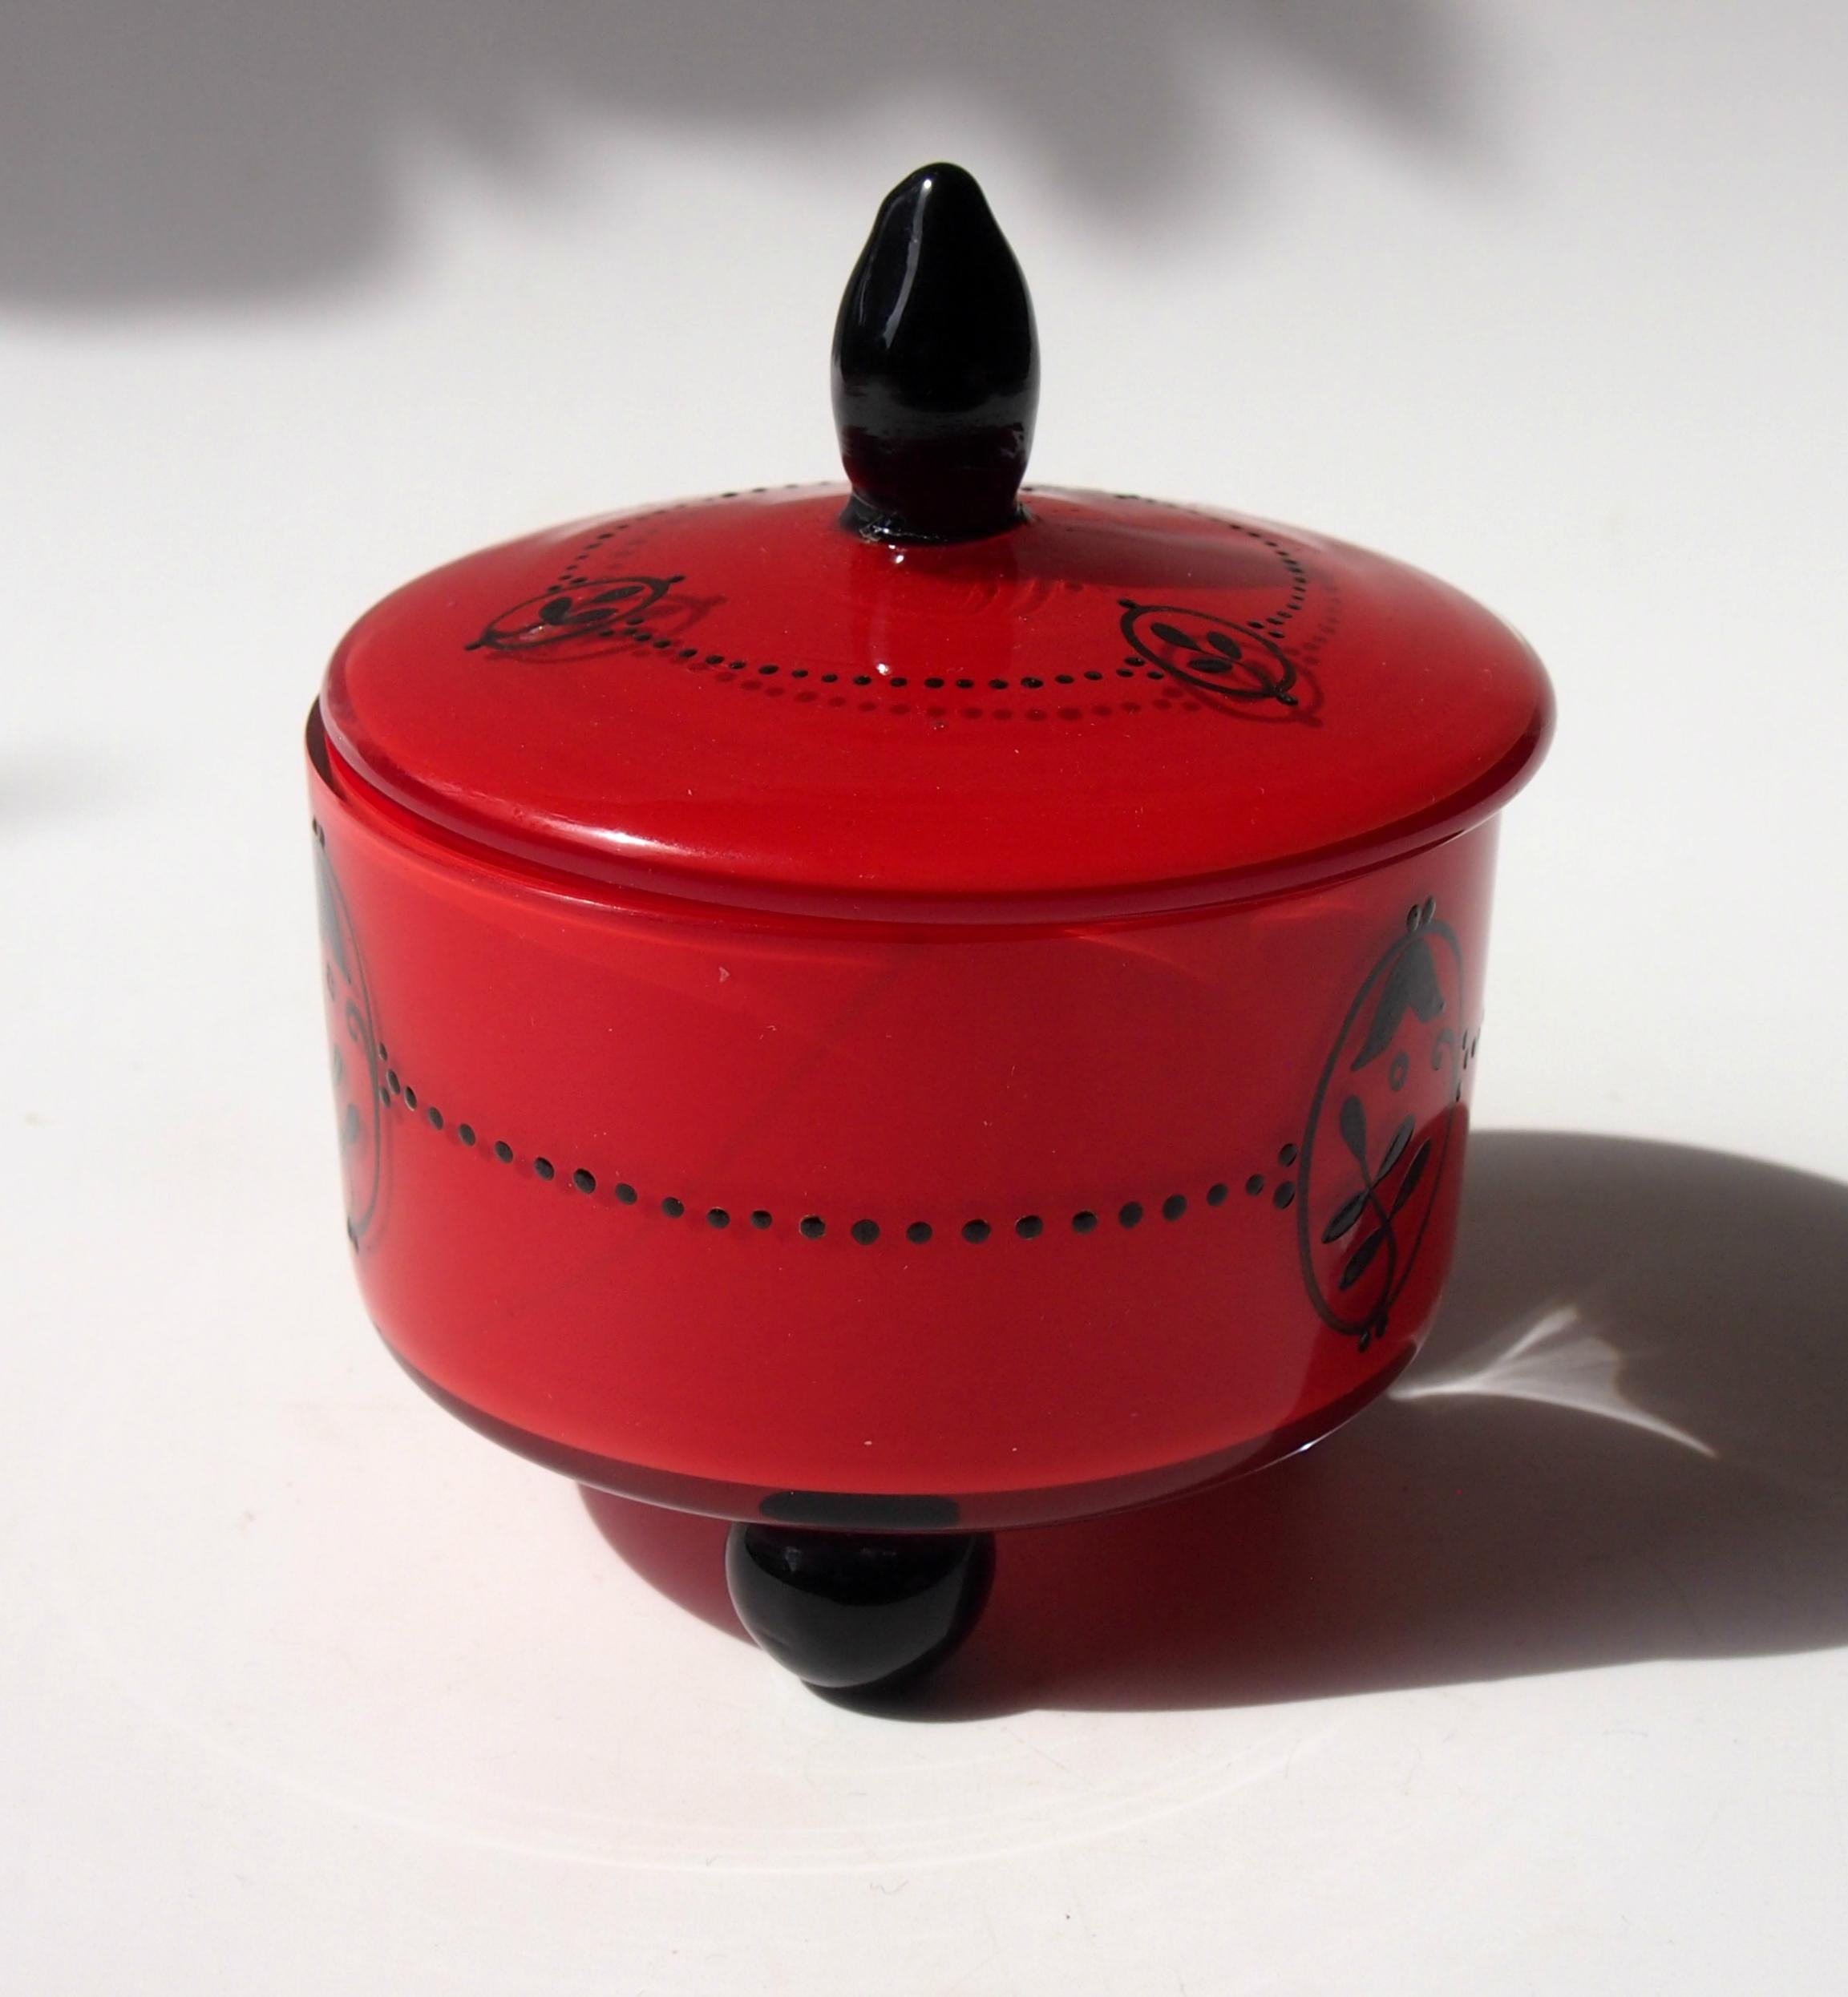 Rare red tango box and cover by Loetz enameled in black with black feet and lid finial. Designed by one of their greatest designers - Dagobert Peche. 

Loetz was by far the most important art glass house in the Bohemian region in the first quarter